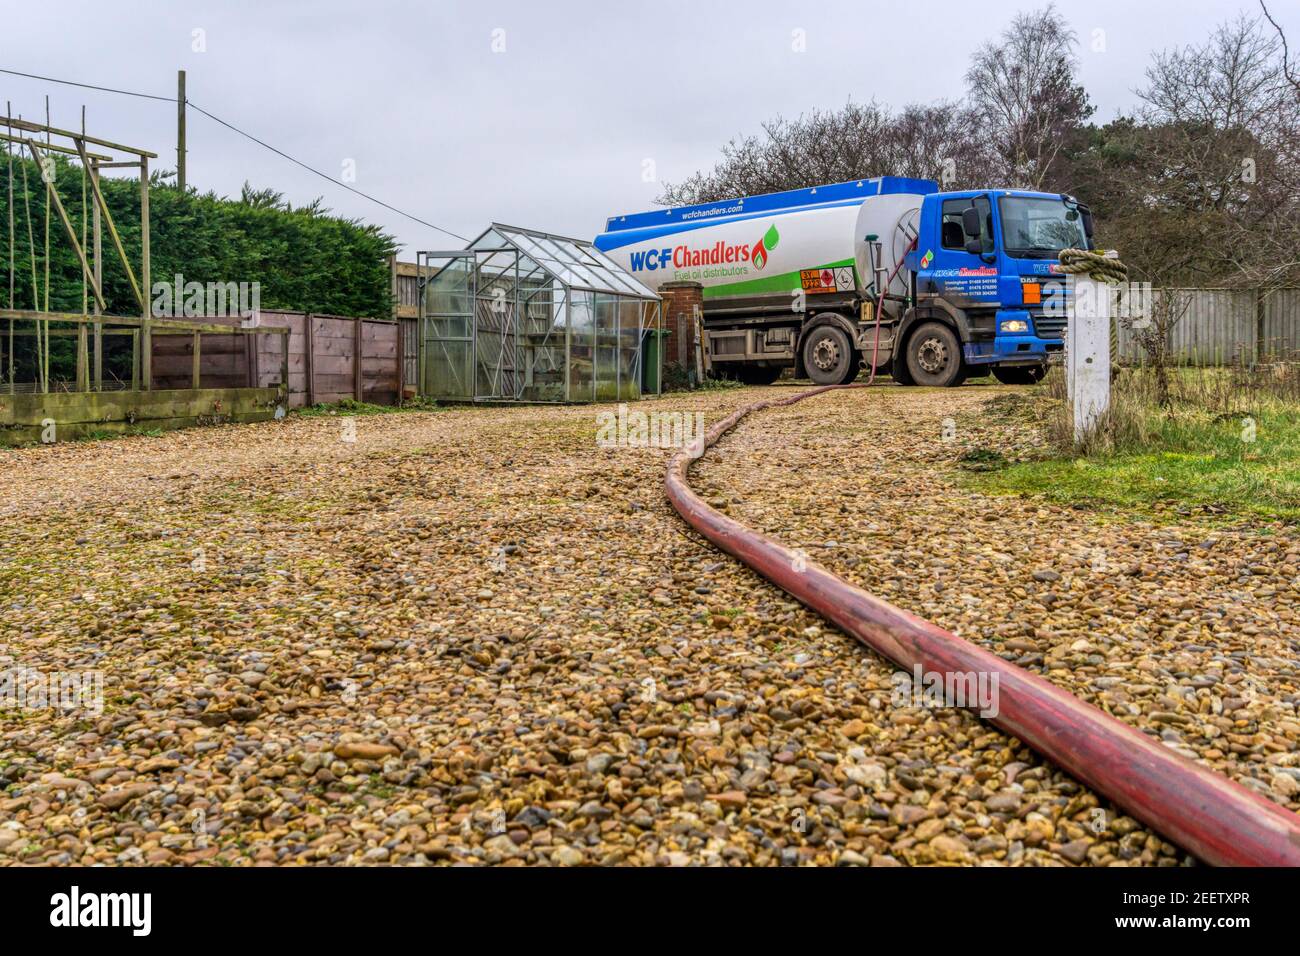 A W C F Chandlers tanker delivering domestic heating oil to a house in the country. Stock Photo